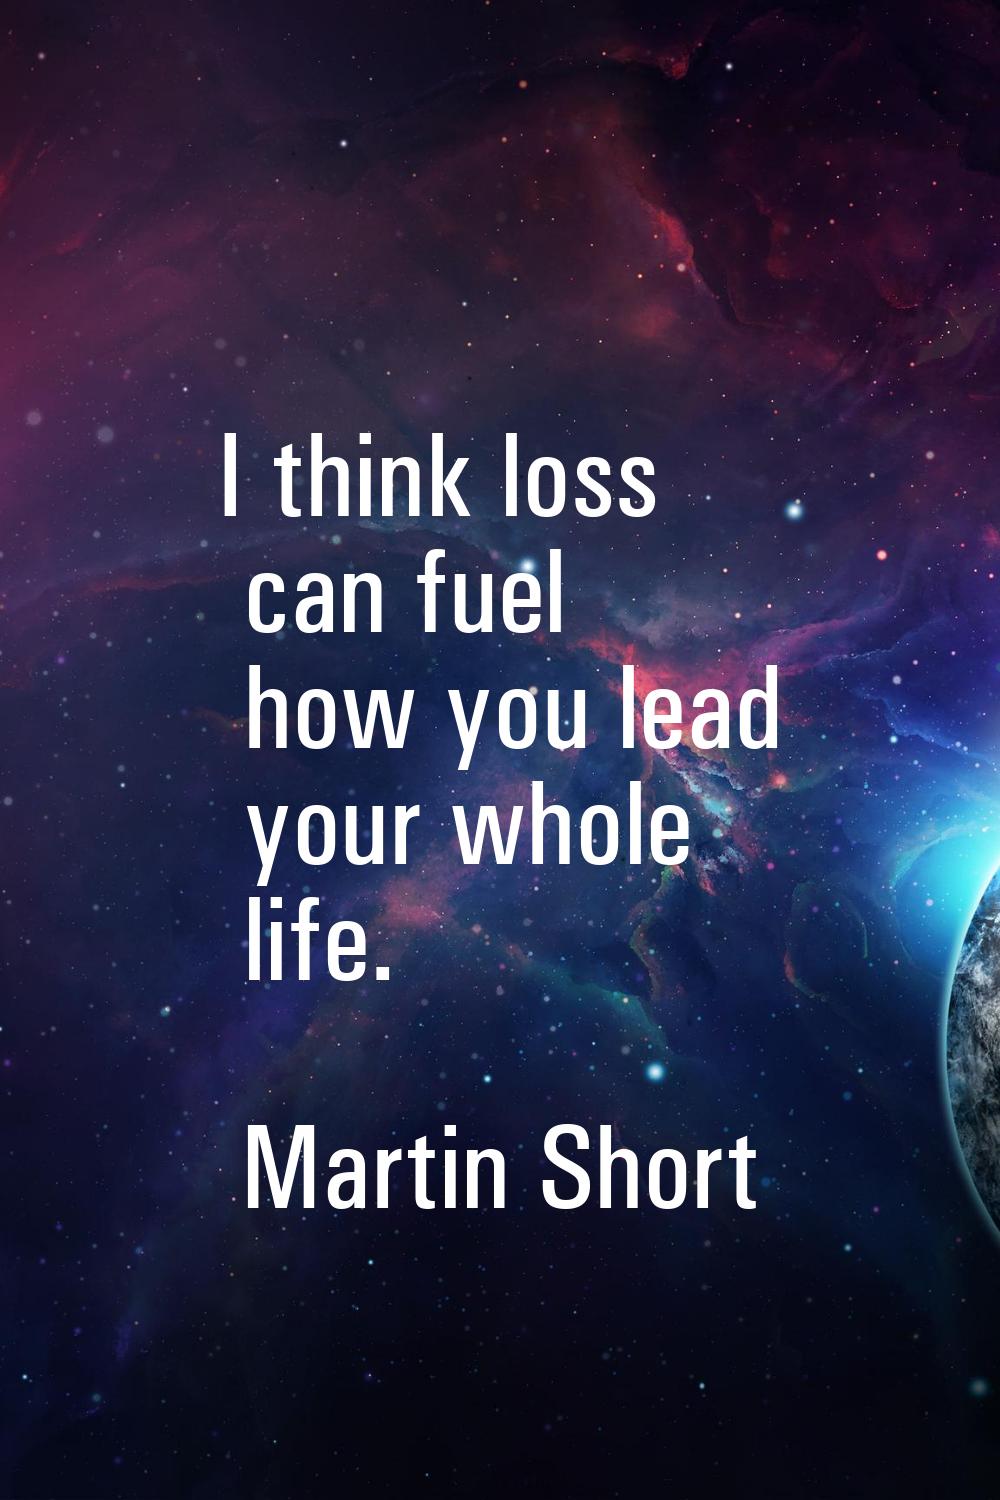 I think loss can fuel how you lead your whole life.